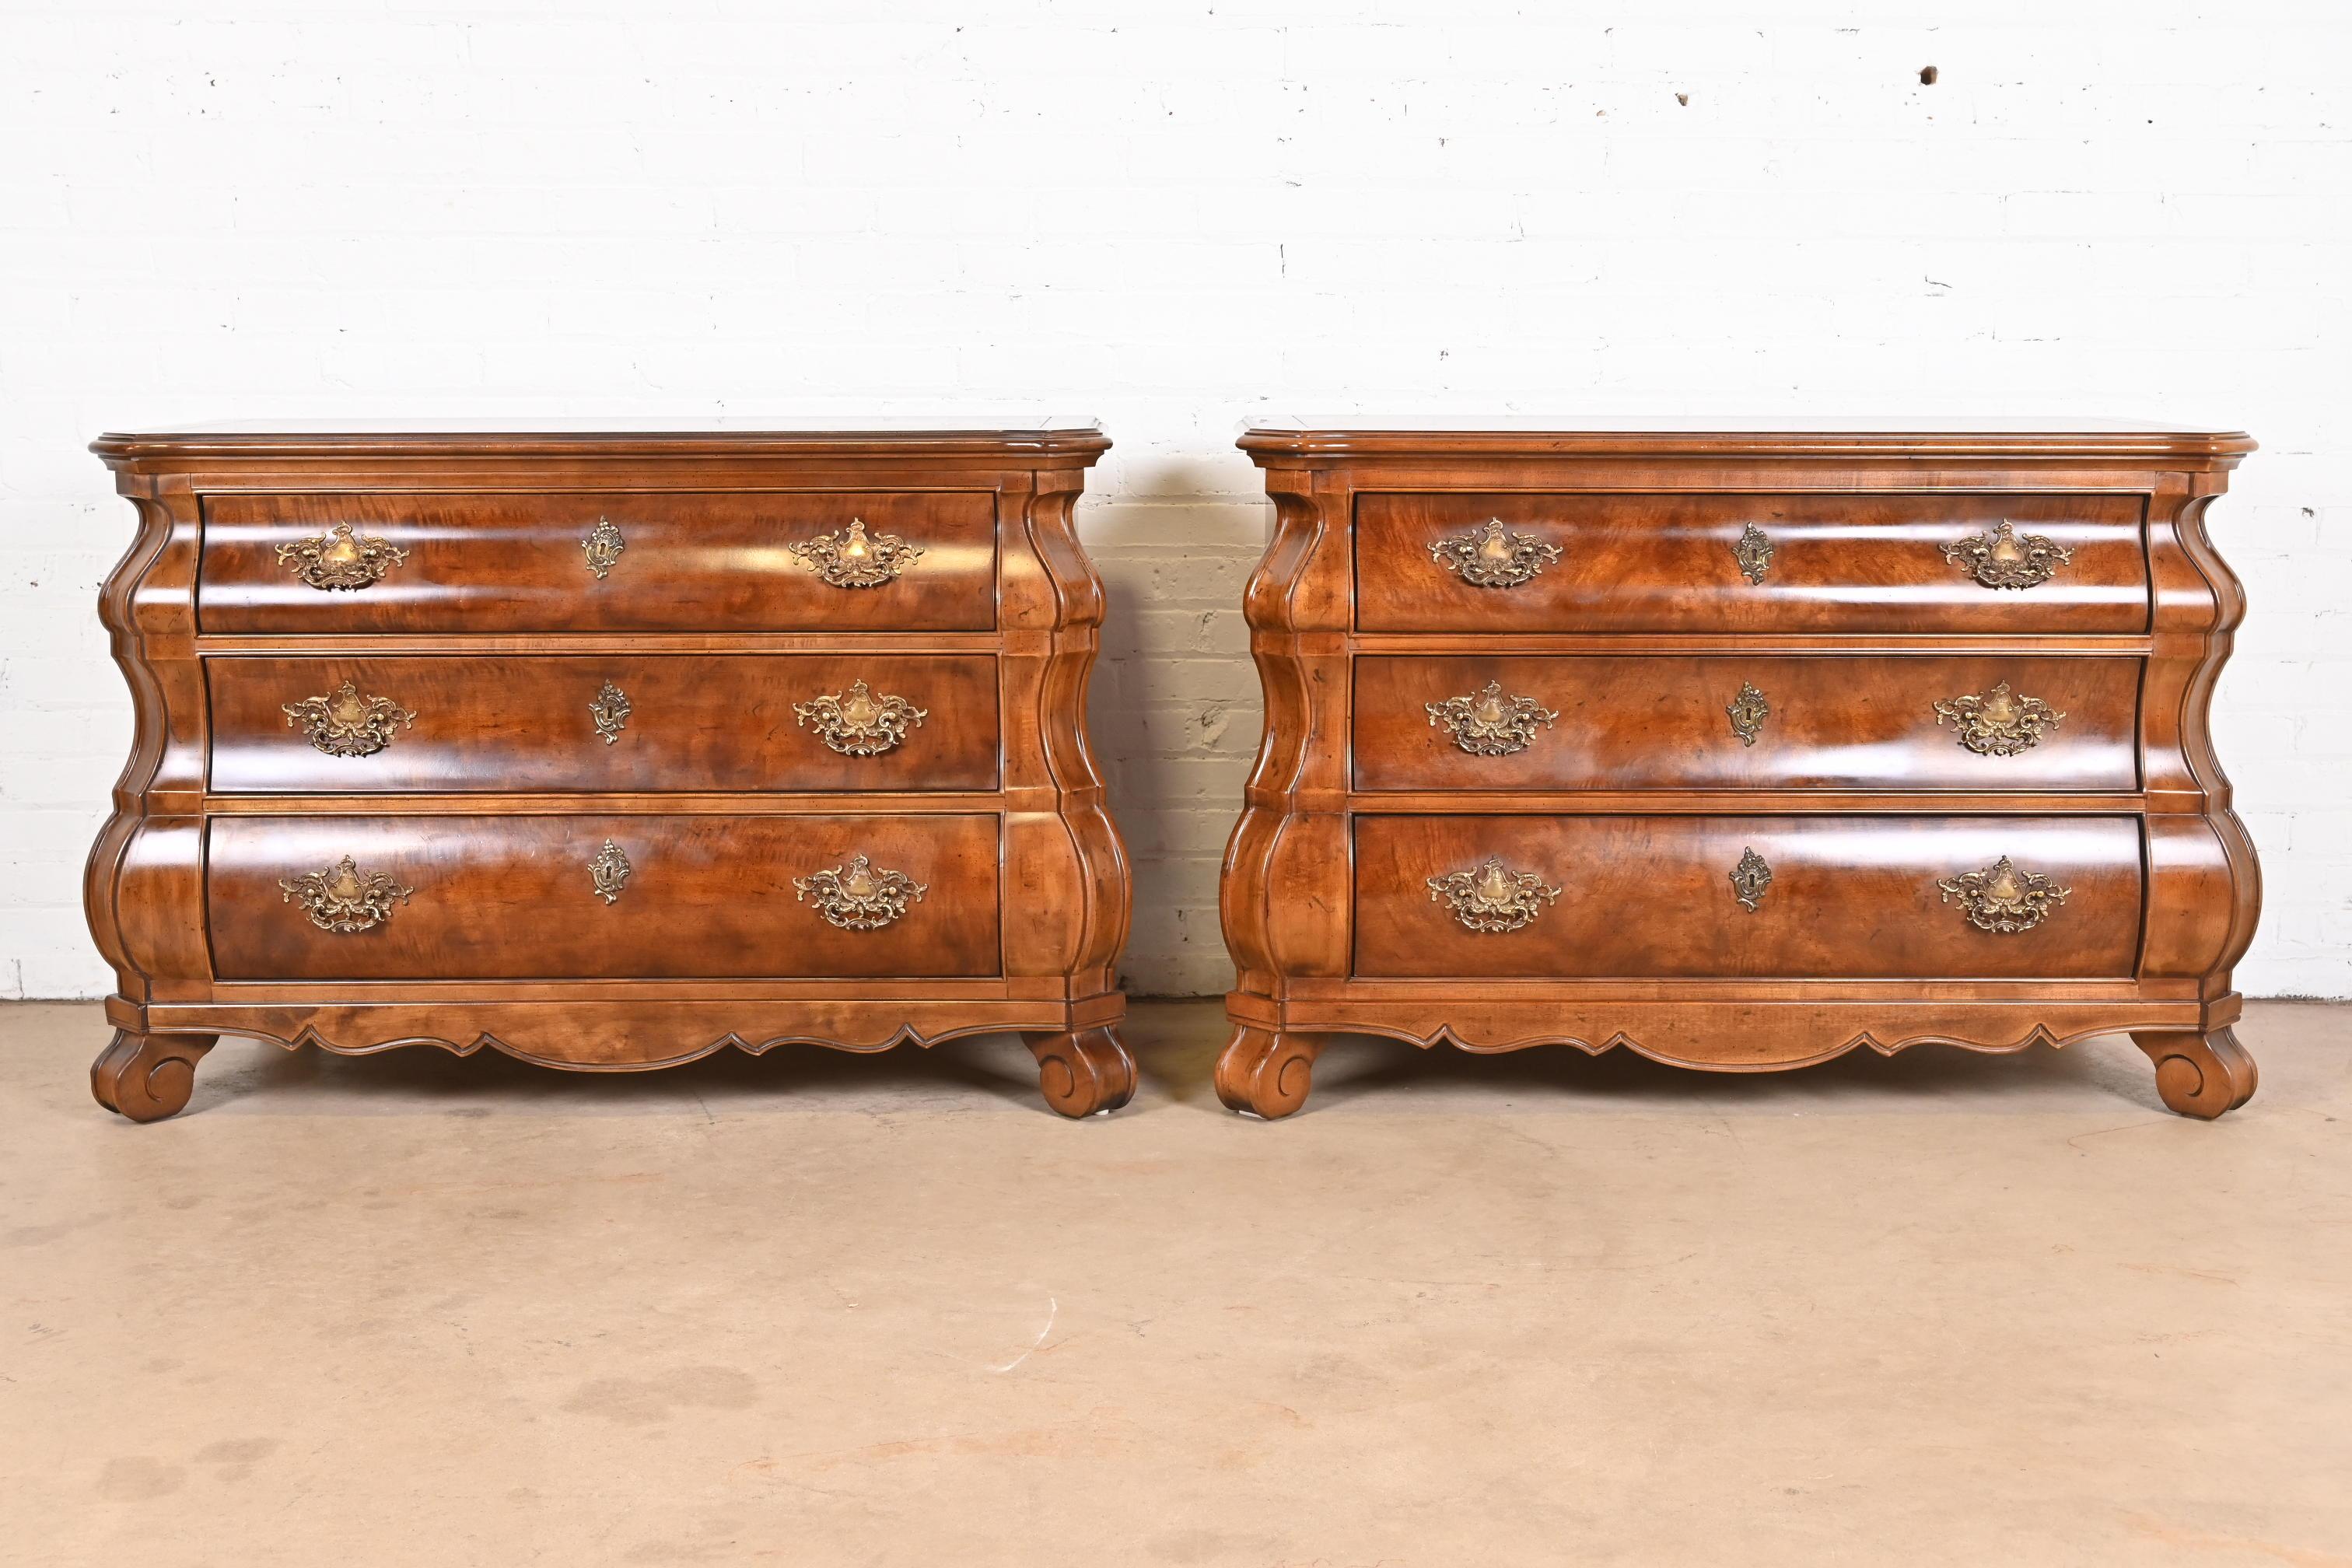 American Henredon Italian Baroque Burled Mahogany Bombay Chests or Commodes, Pair For Sale